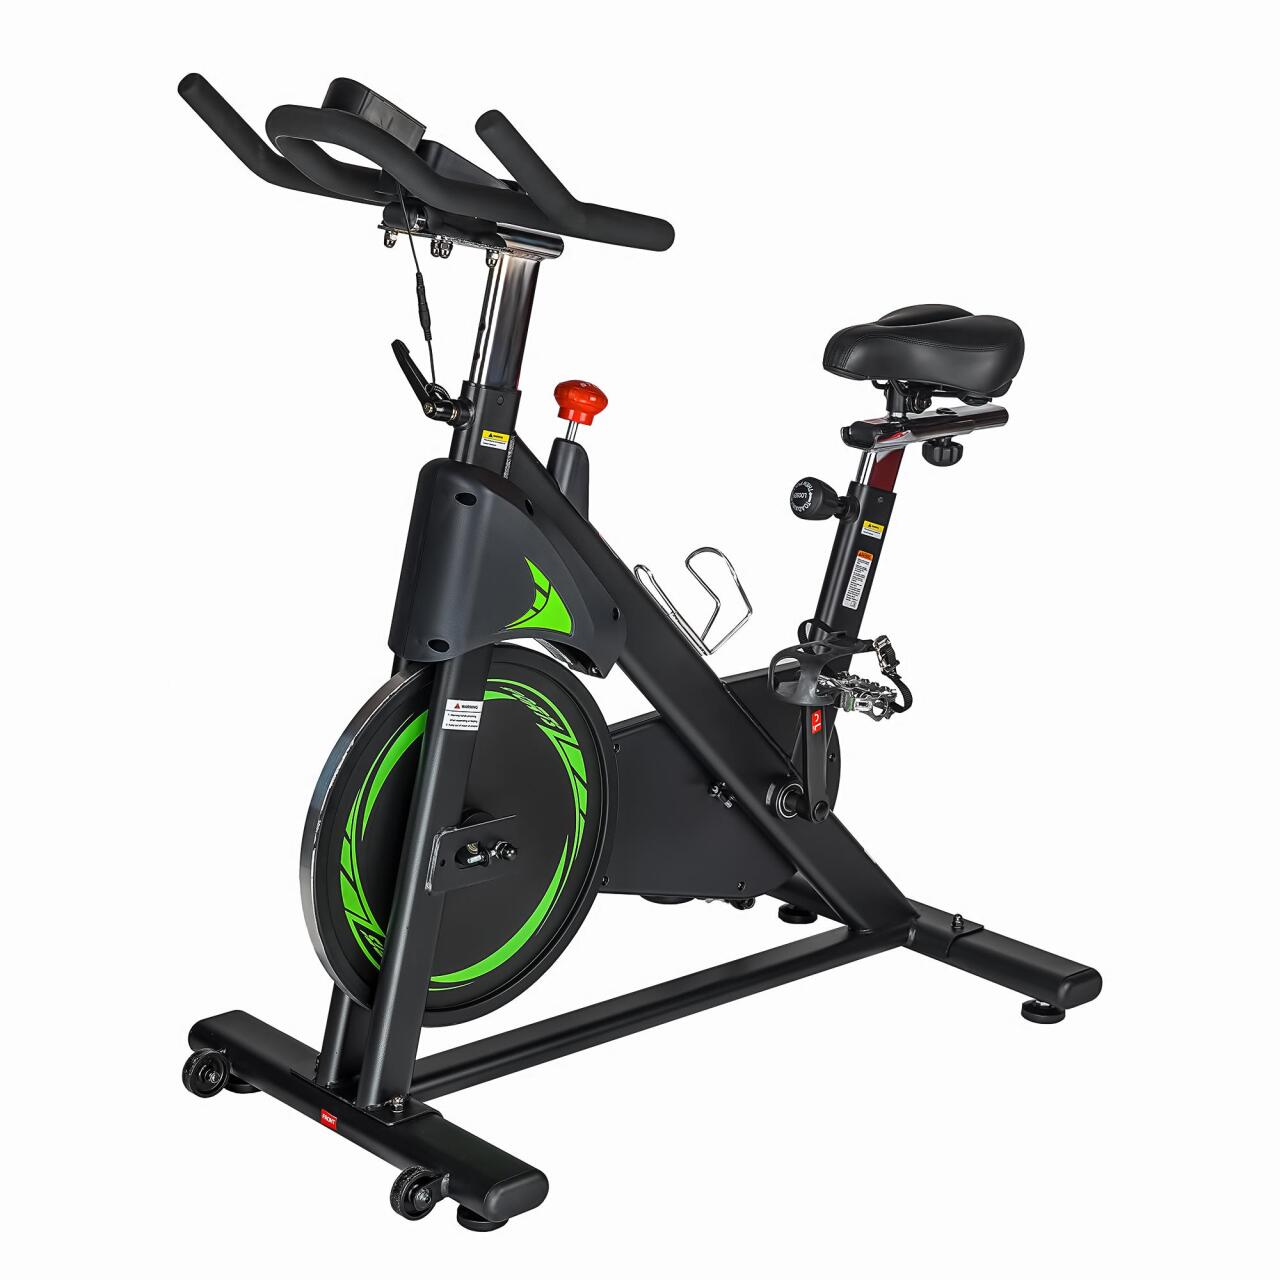 Bicicleta fitness spinning, DHS 2101, greutate volanta 10 kg